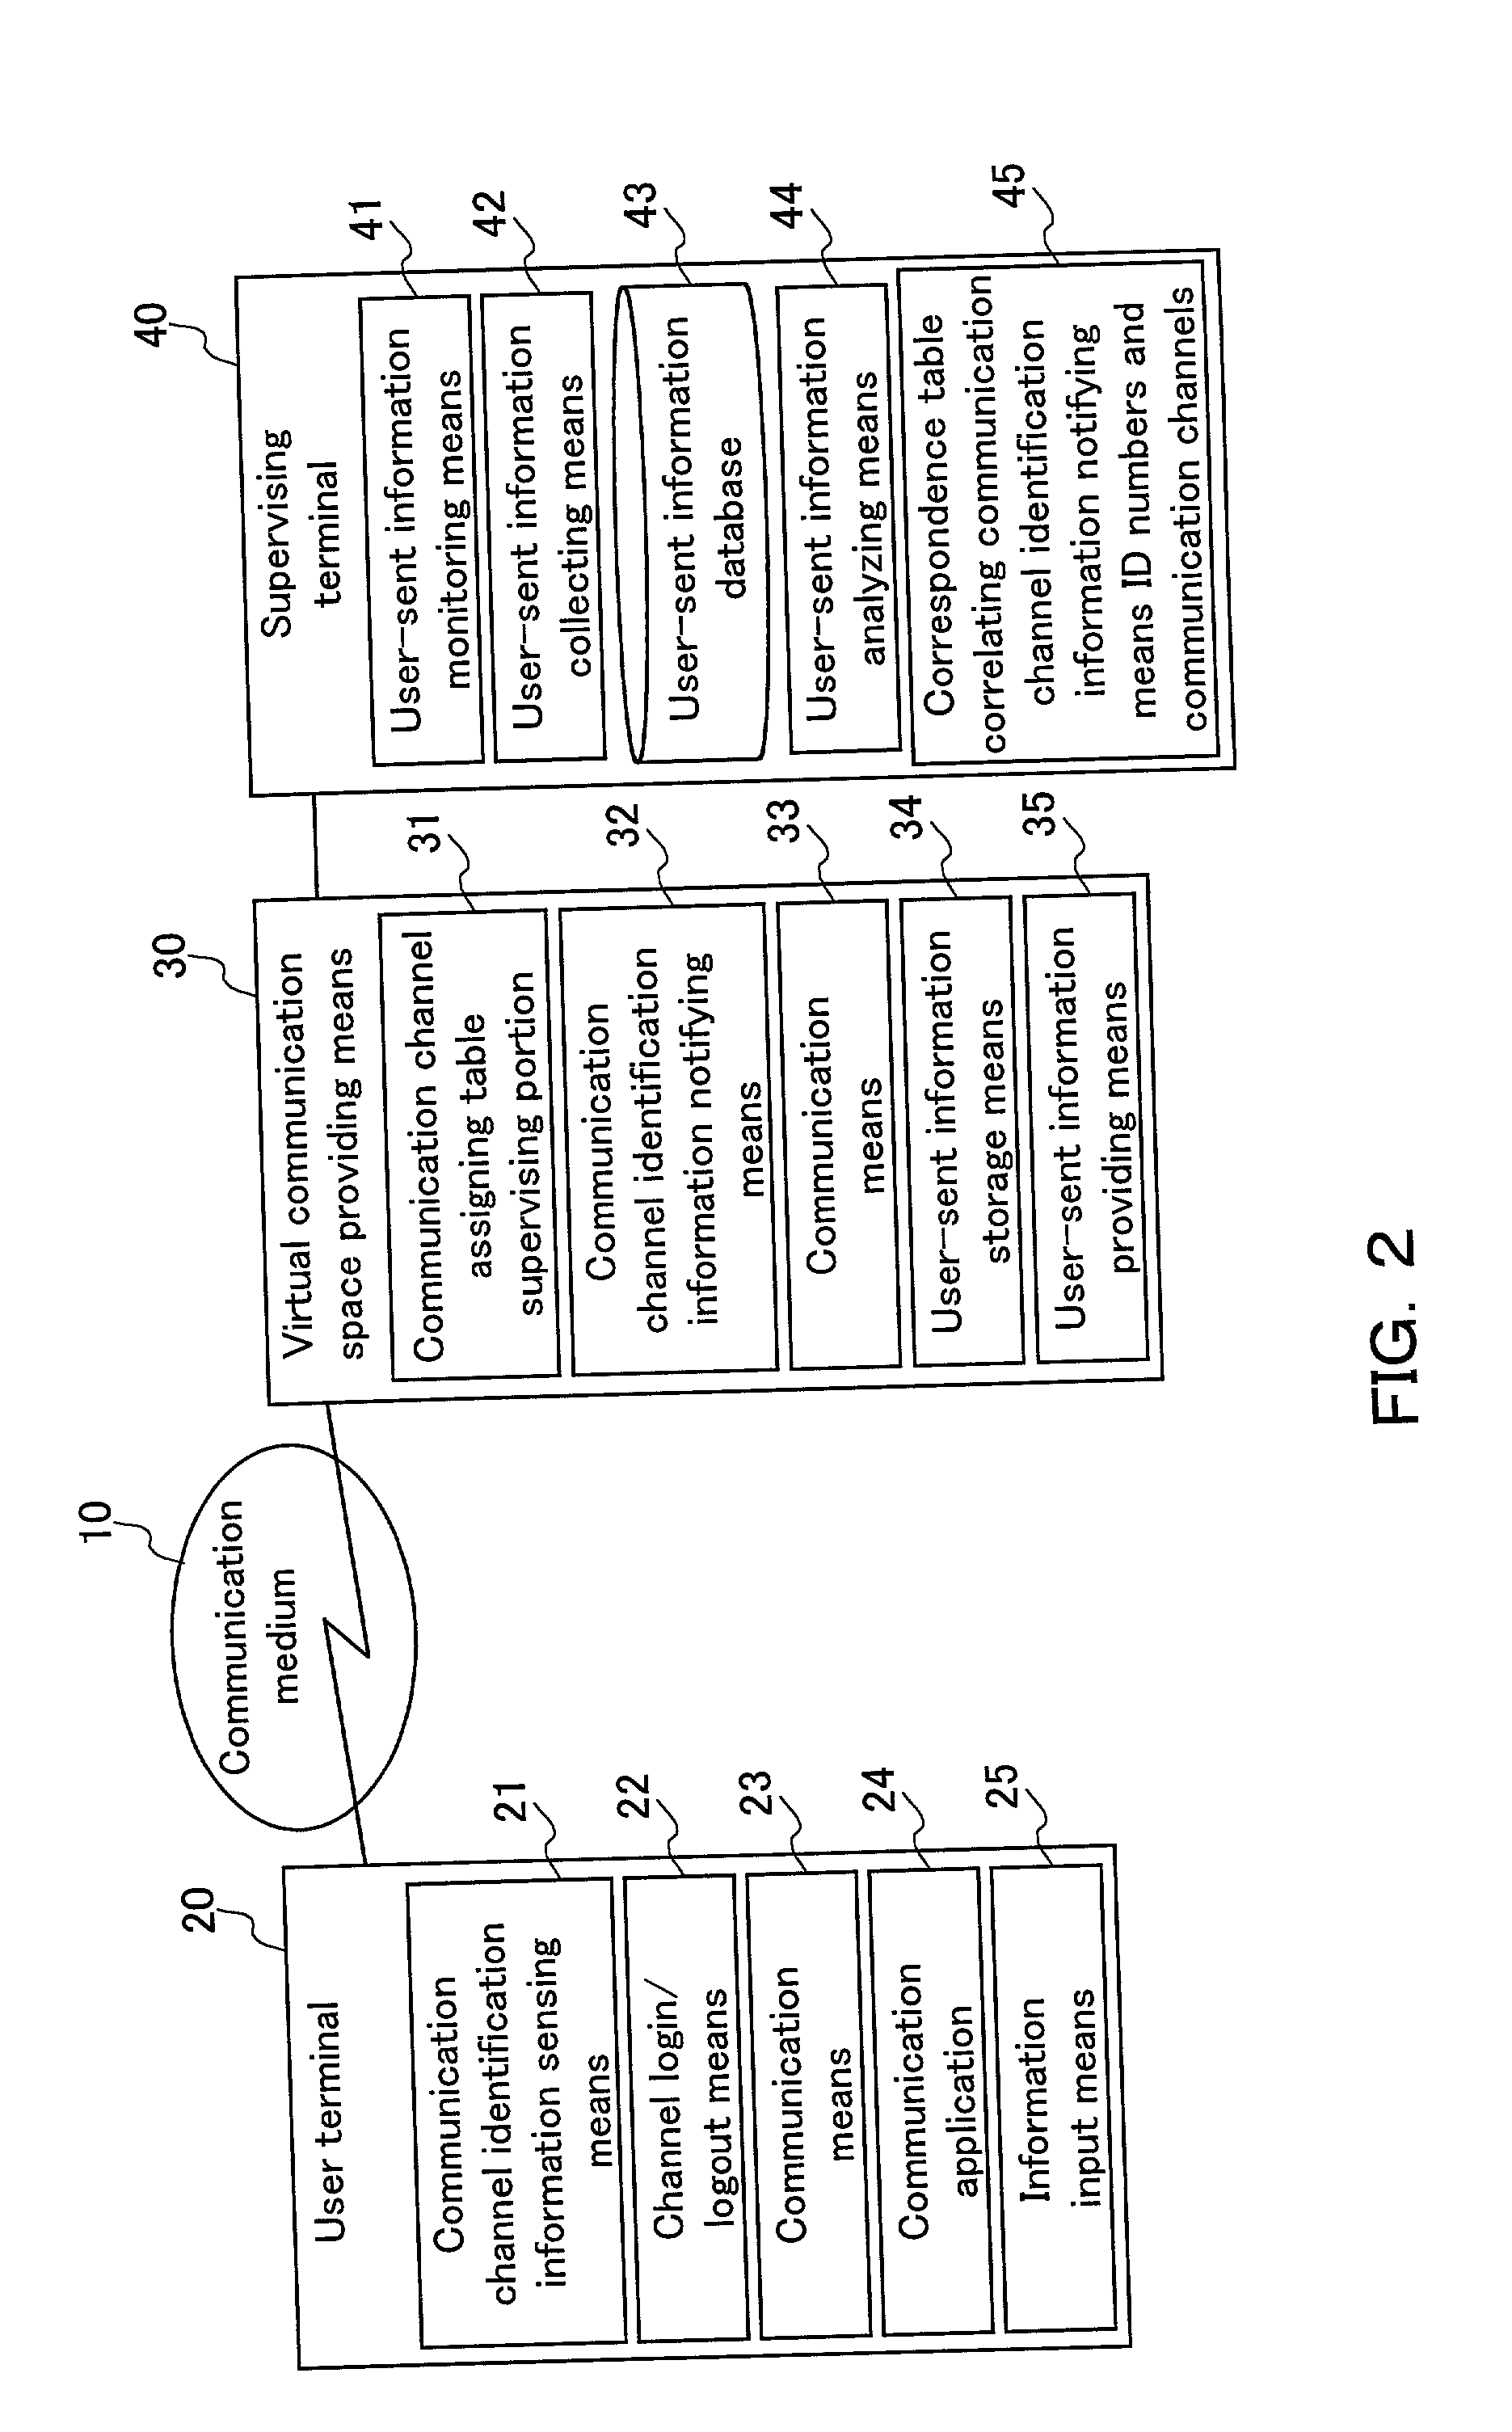 System for providing a virtual communication space corresponding to sensed information from the real world